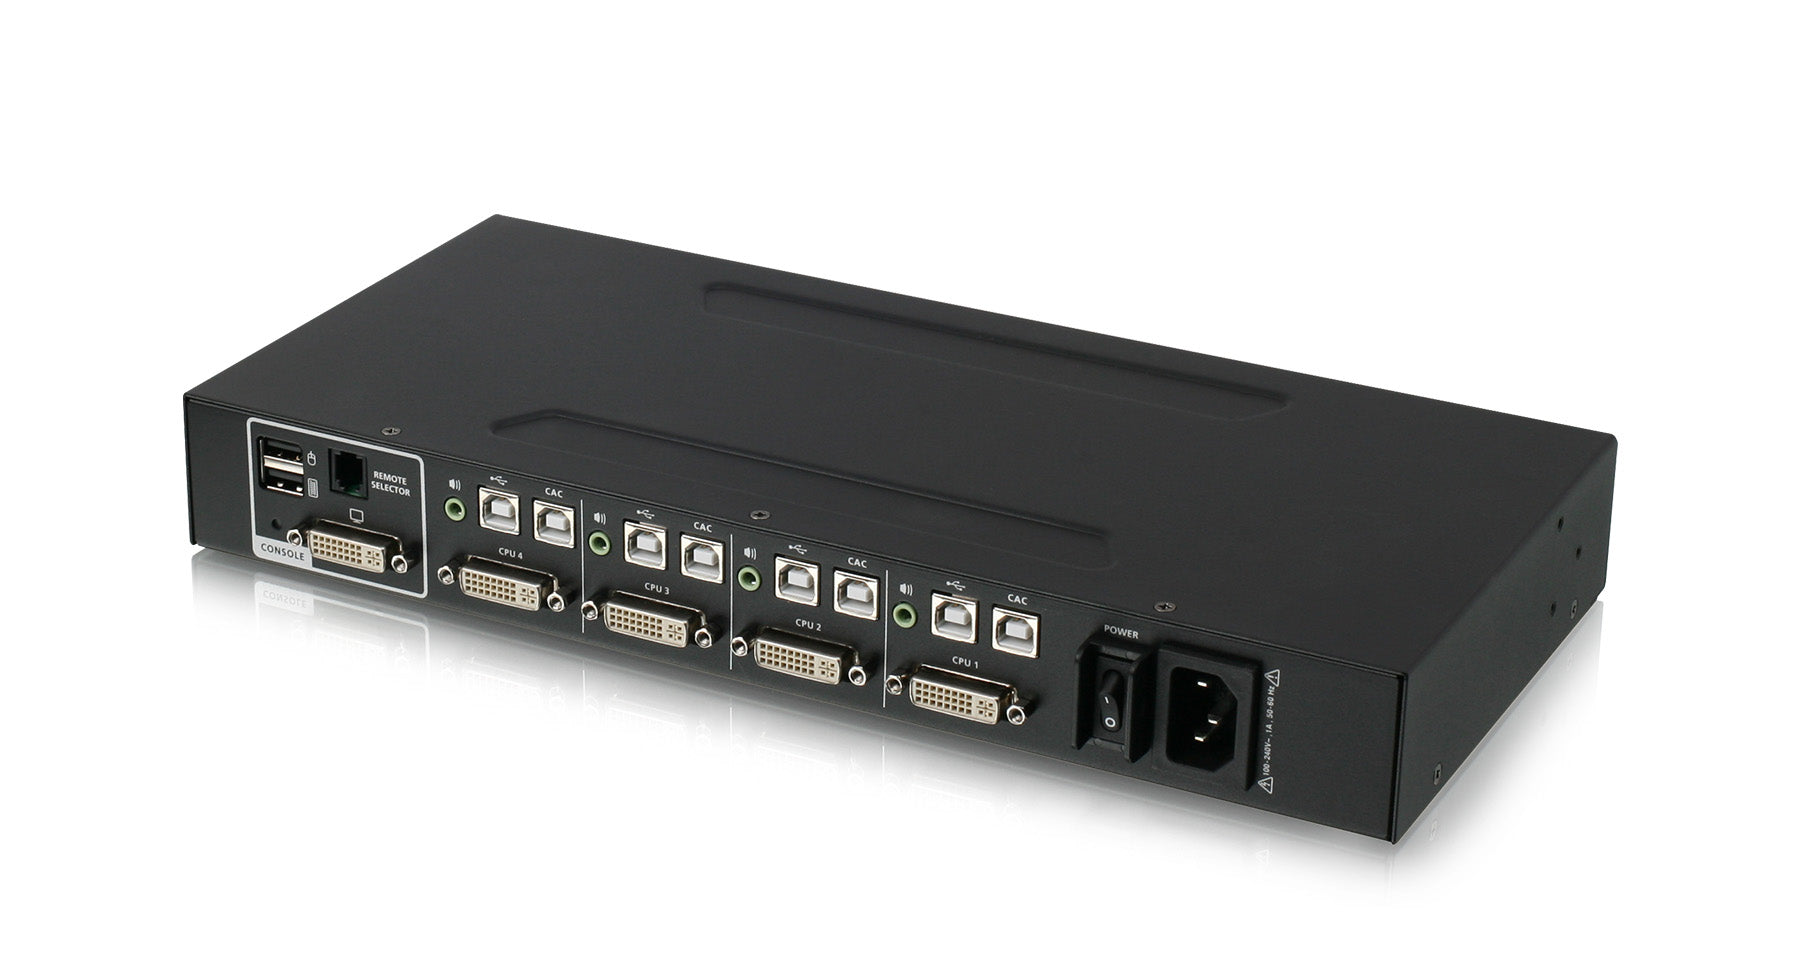 4-Port Single View DVI Secure KVM Switch w/Audio and CAC Support